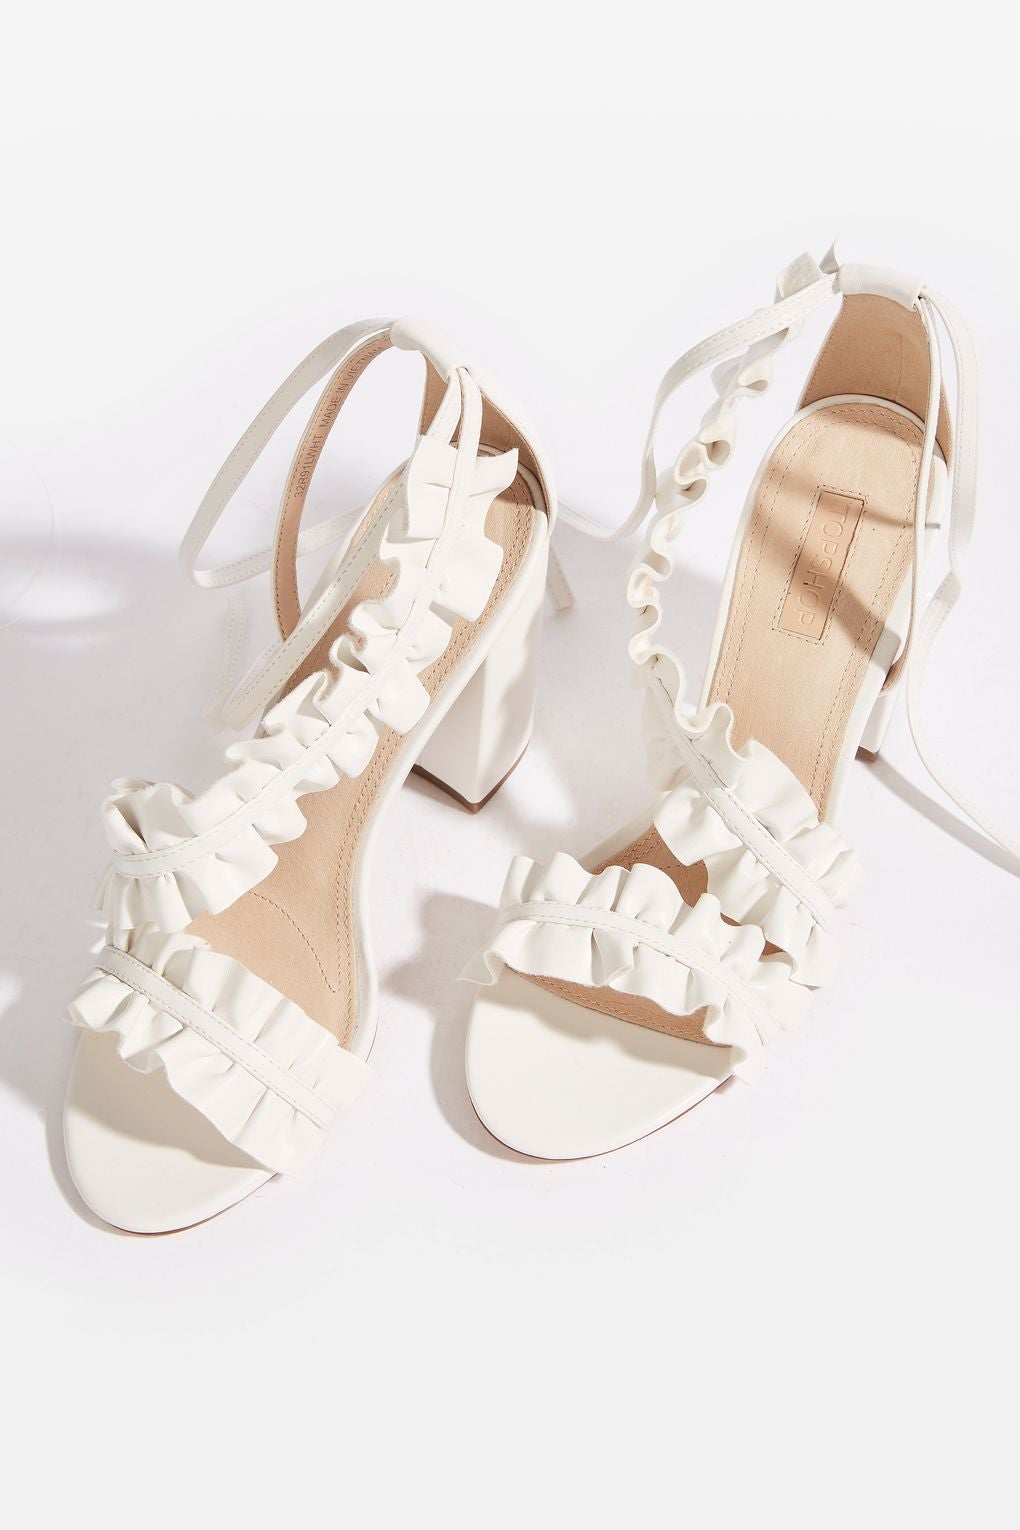 15 Must-Have Shoes for Graduation